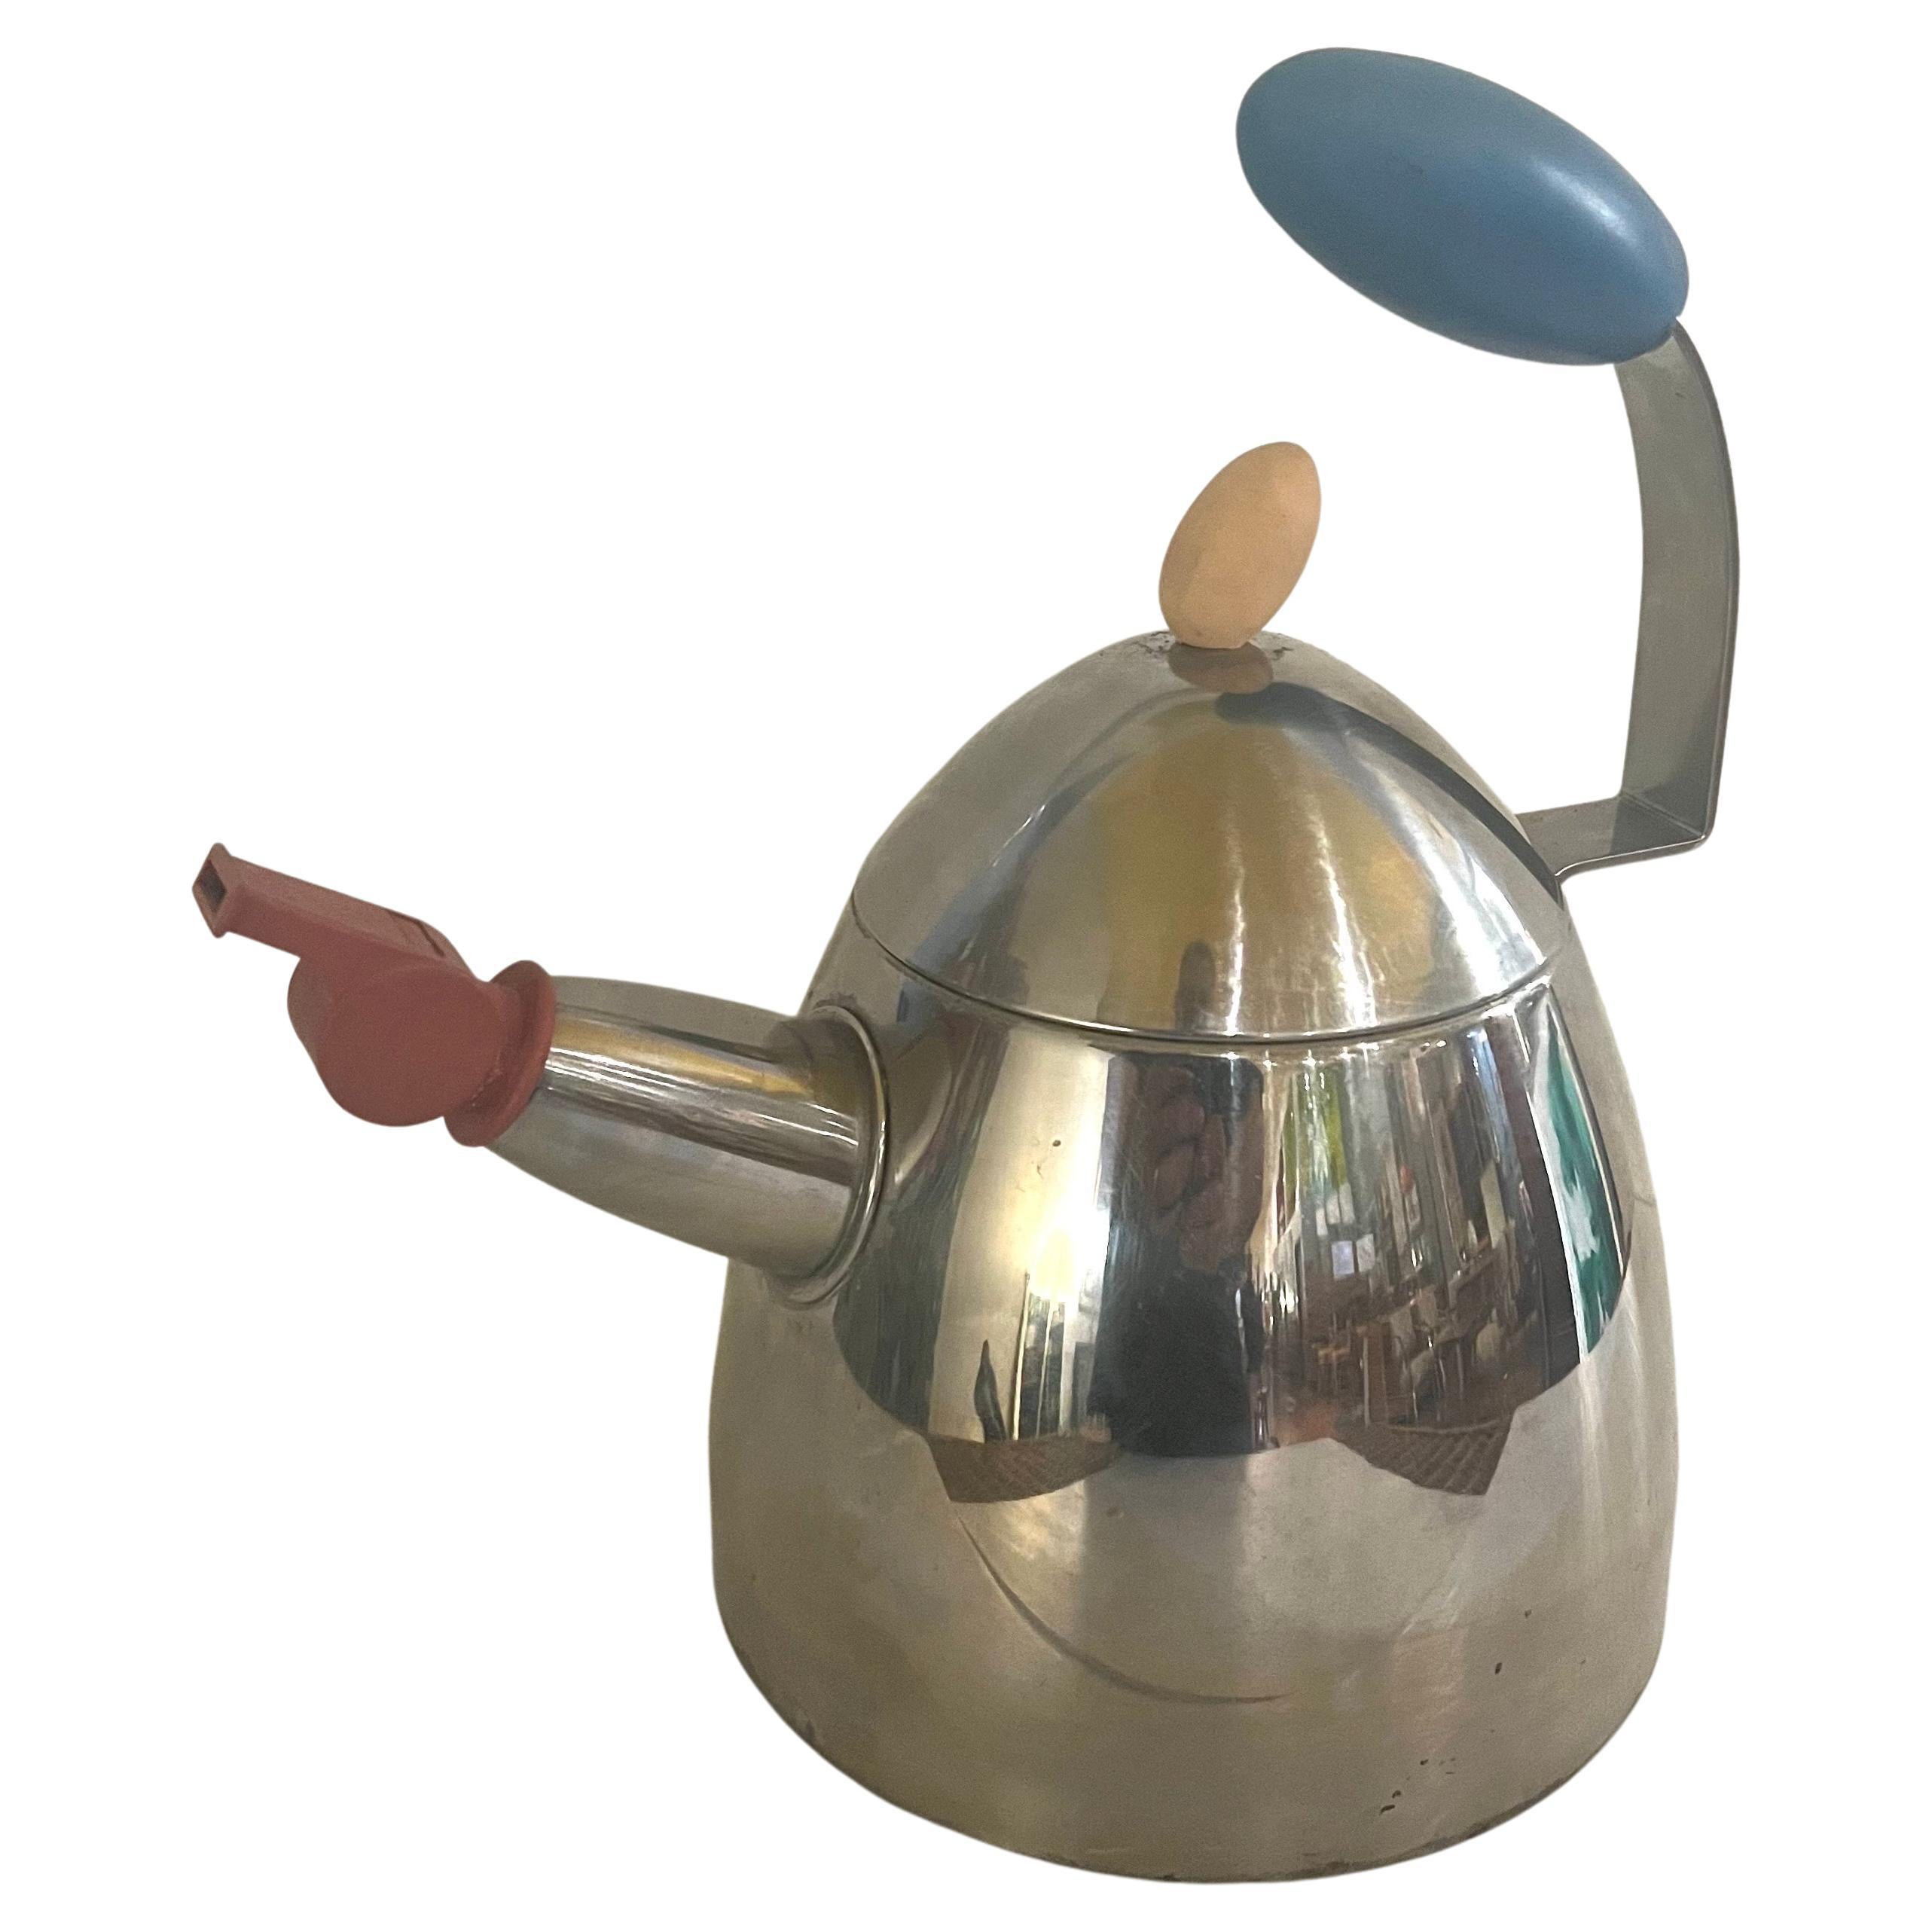 A Classic postmodern Memphis era design teapot designed by Michael Graves, circa the 1980s, a rare design not many were produced it's in good condition except for a ding on the bottom as shown, only shows when you look from the bottom. sold as/is